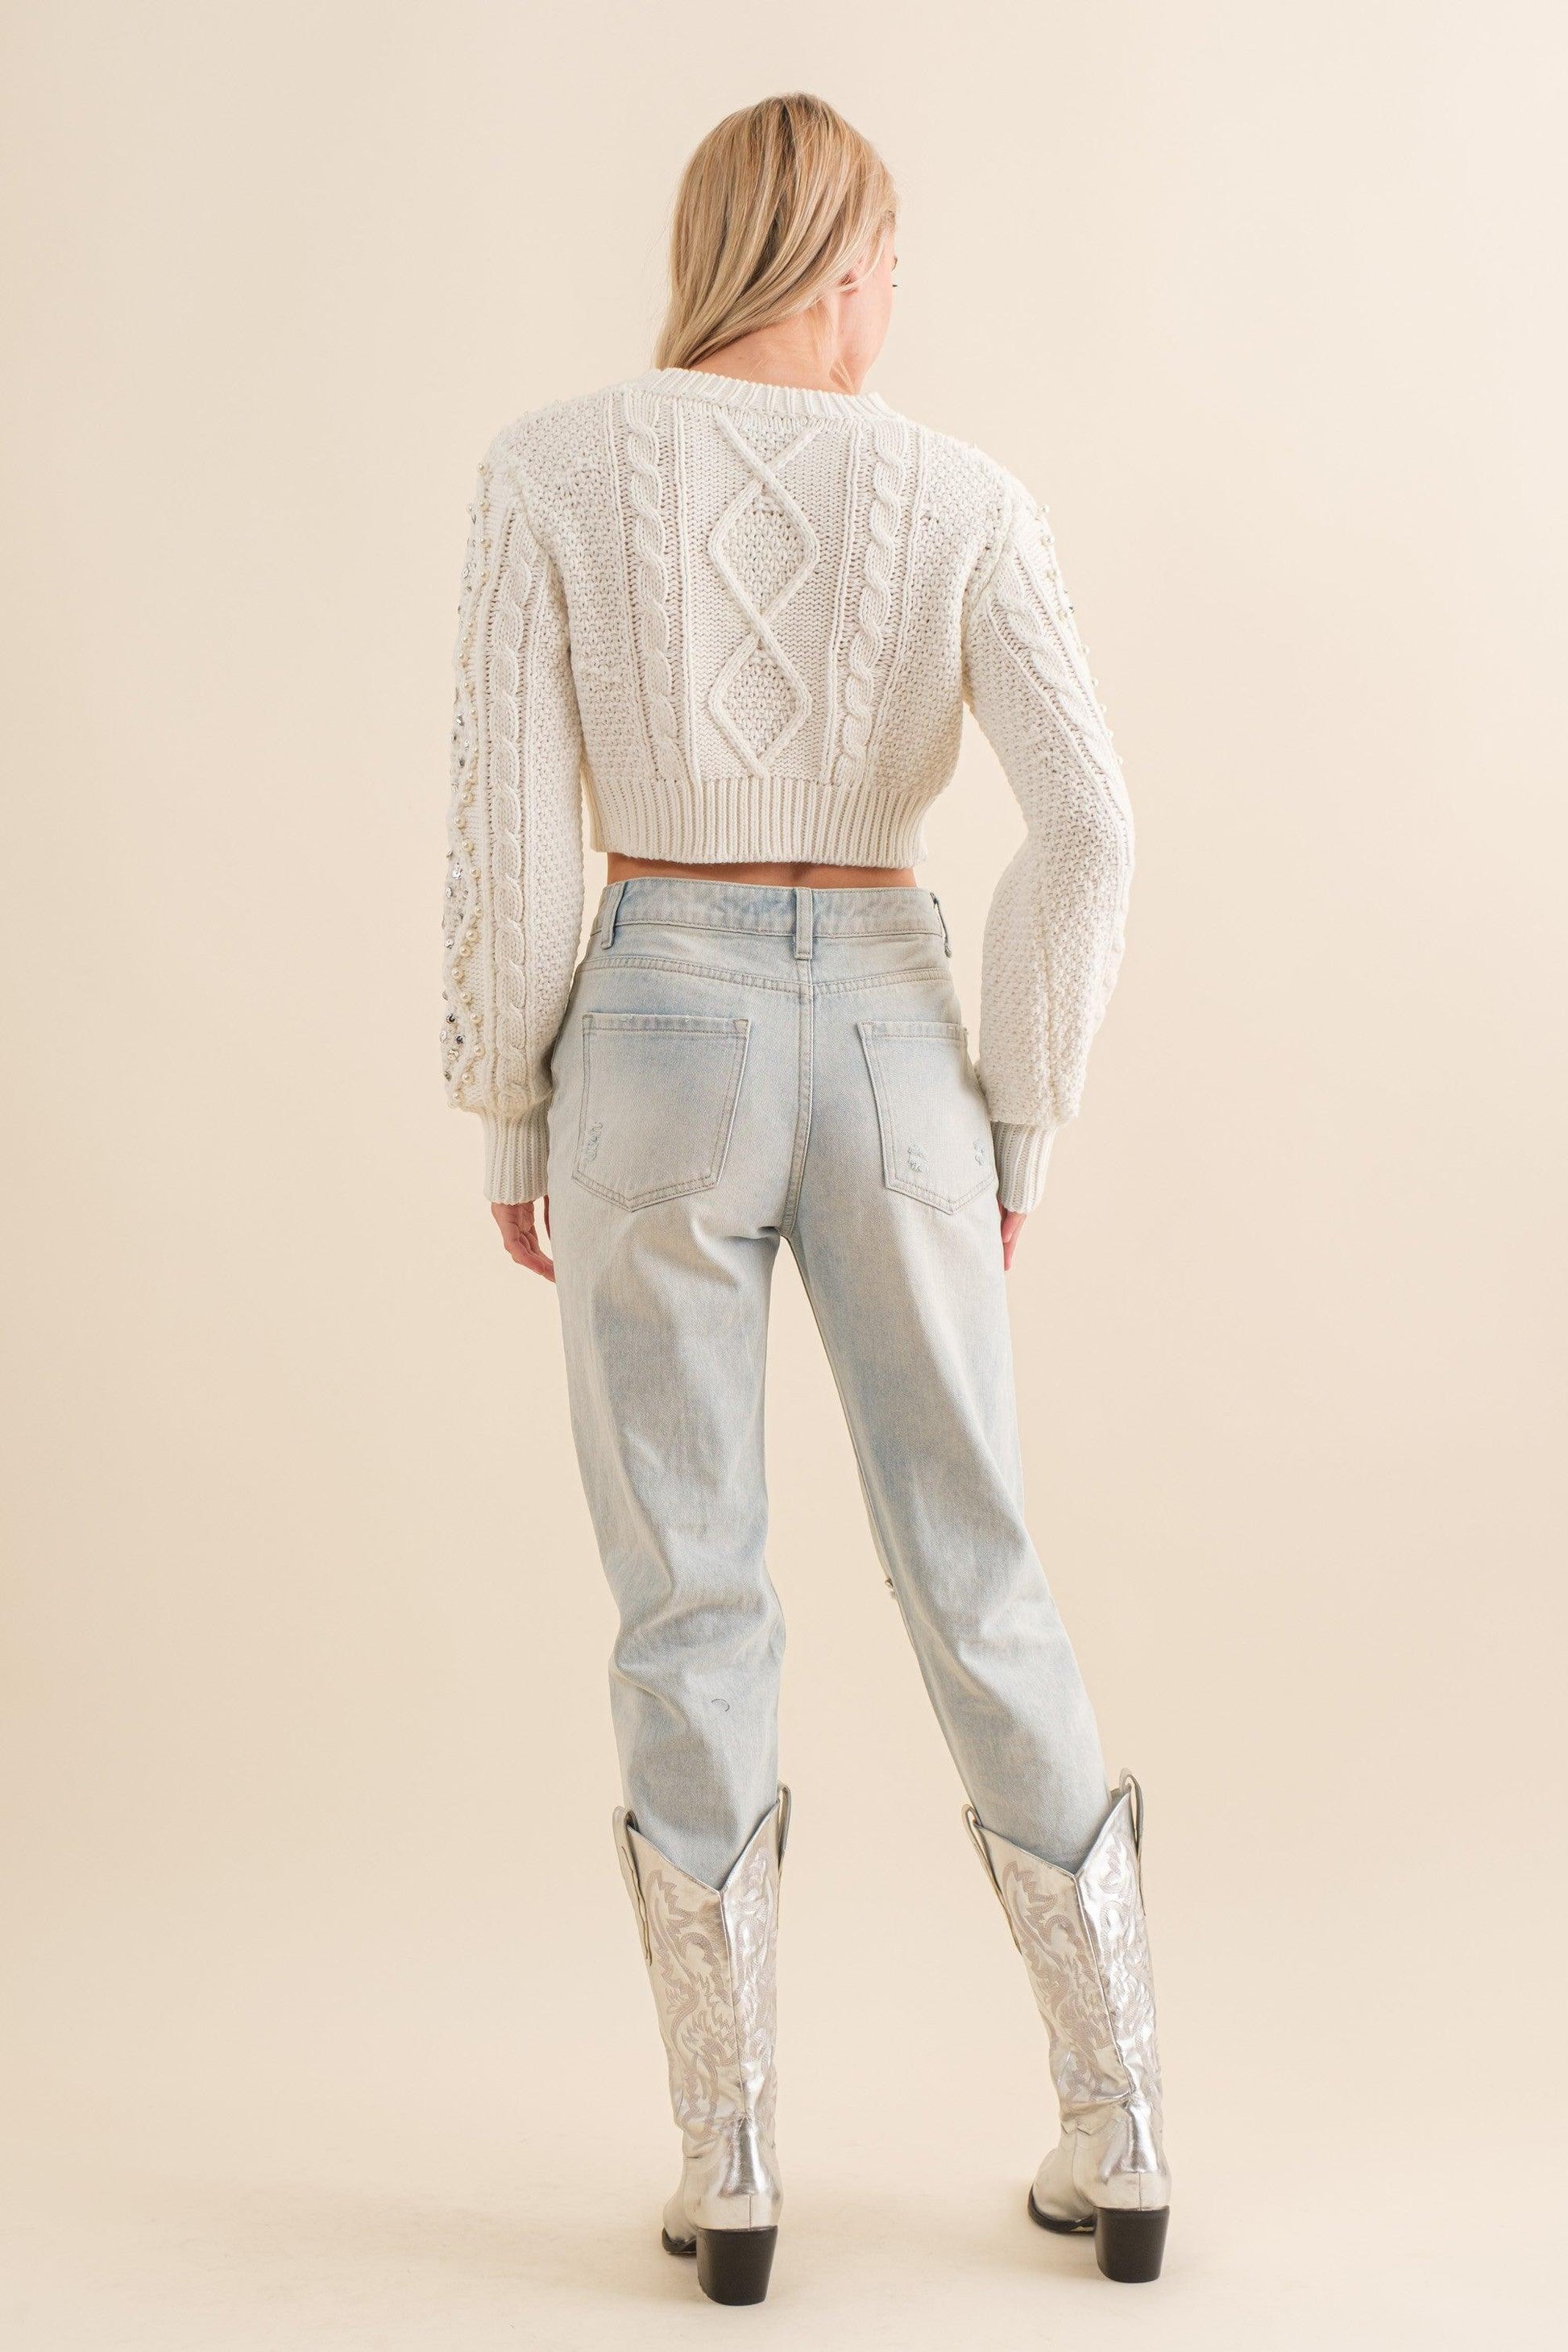 crop cable knit pearl embellished sweater - RK Collections Boutique